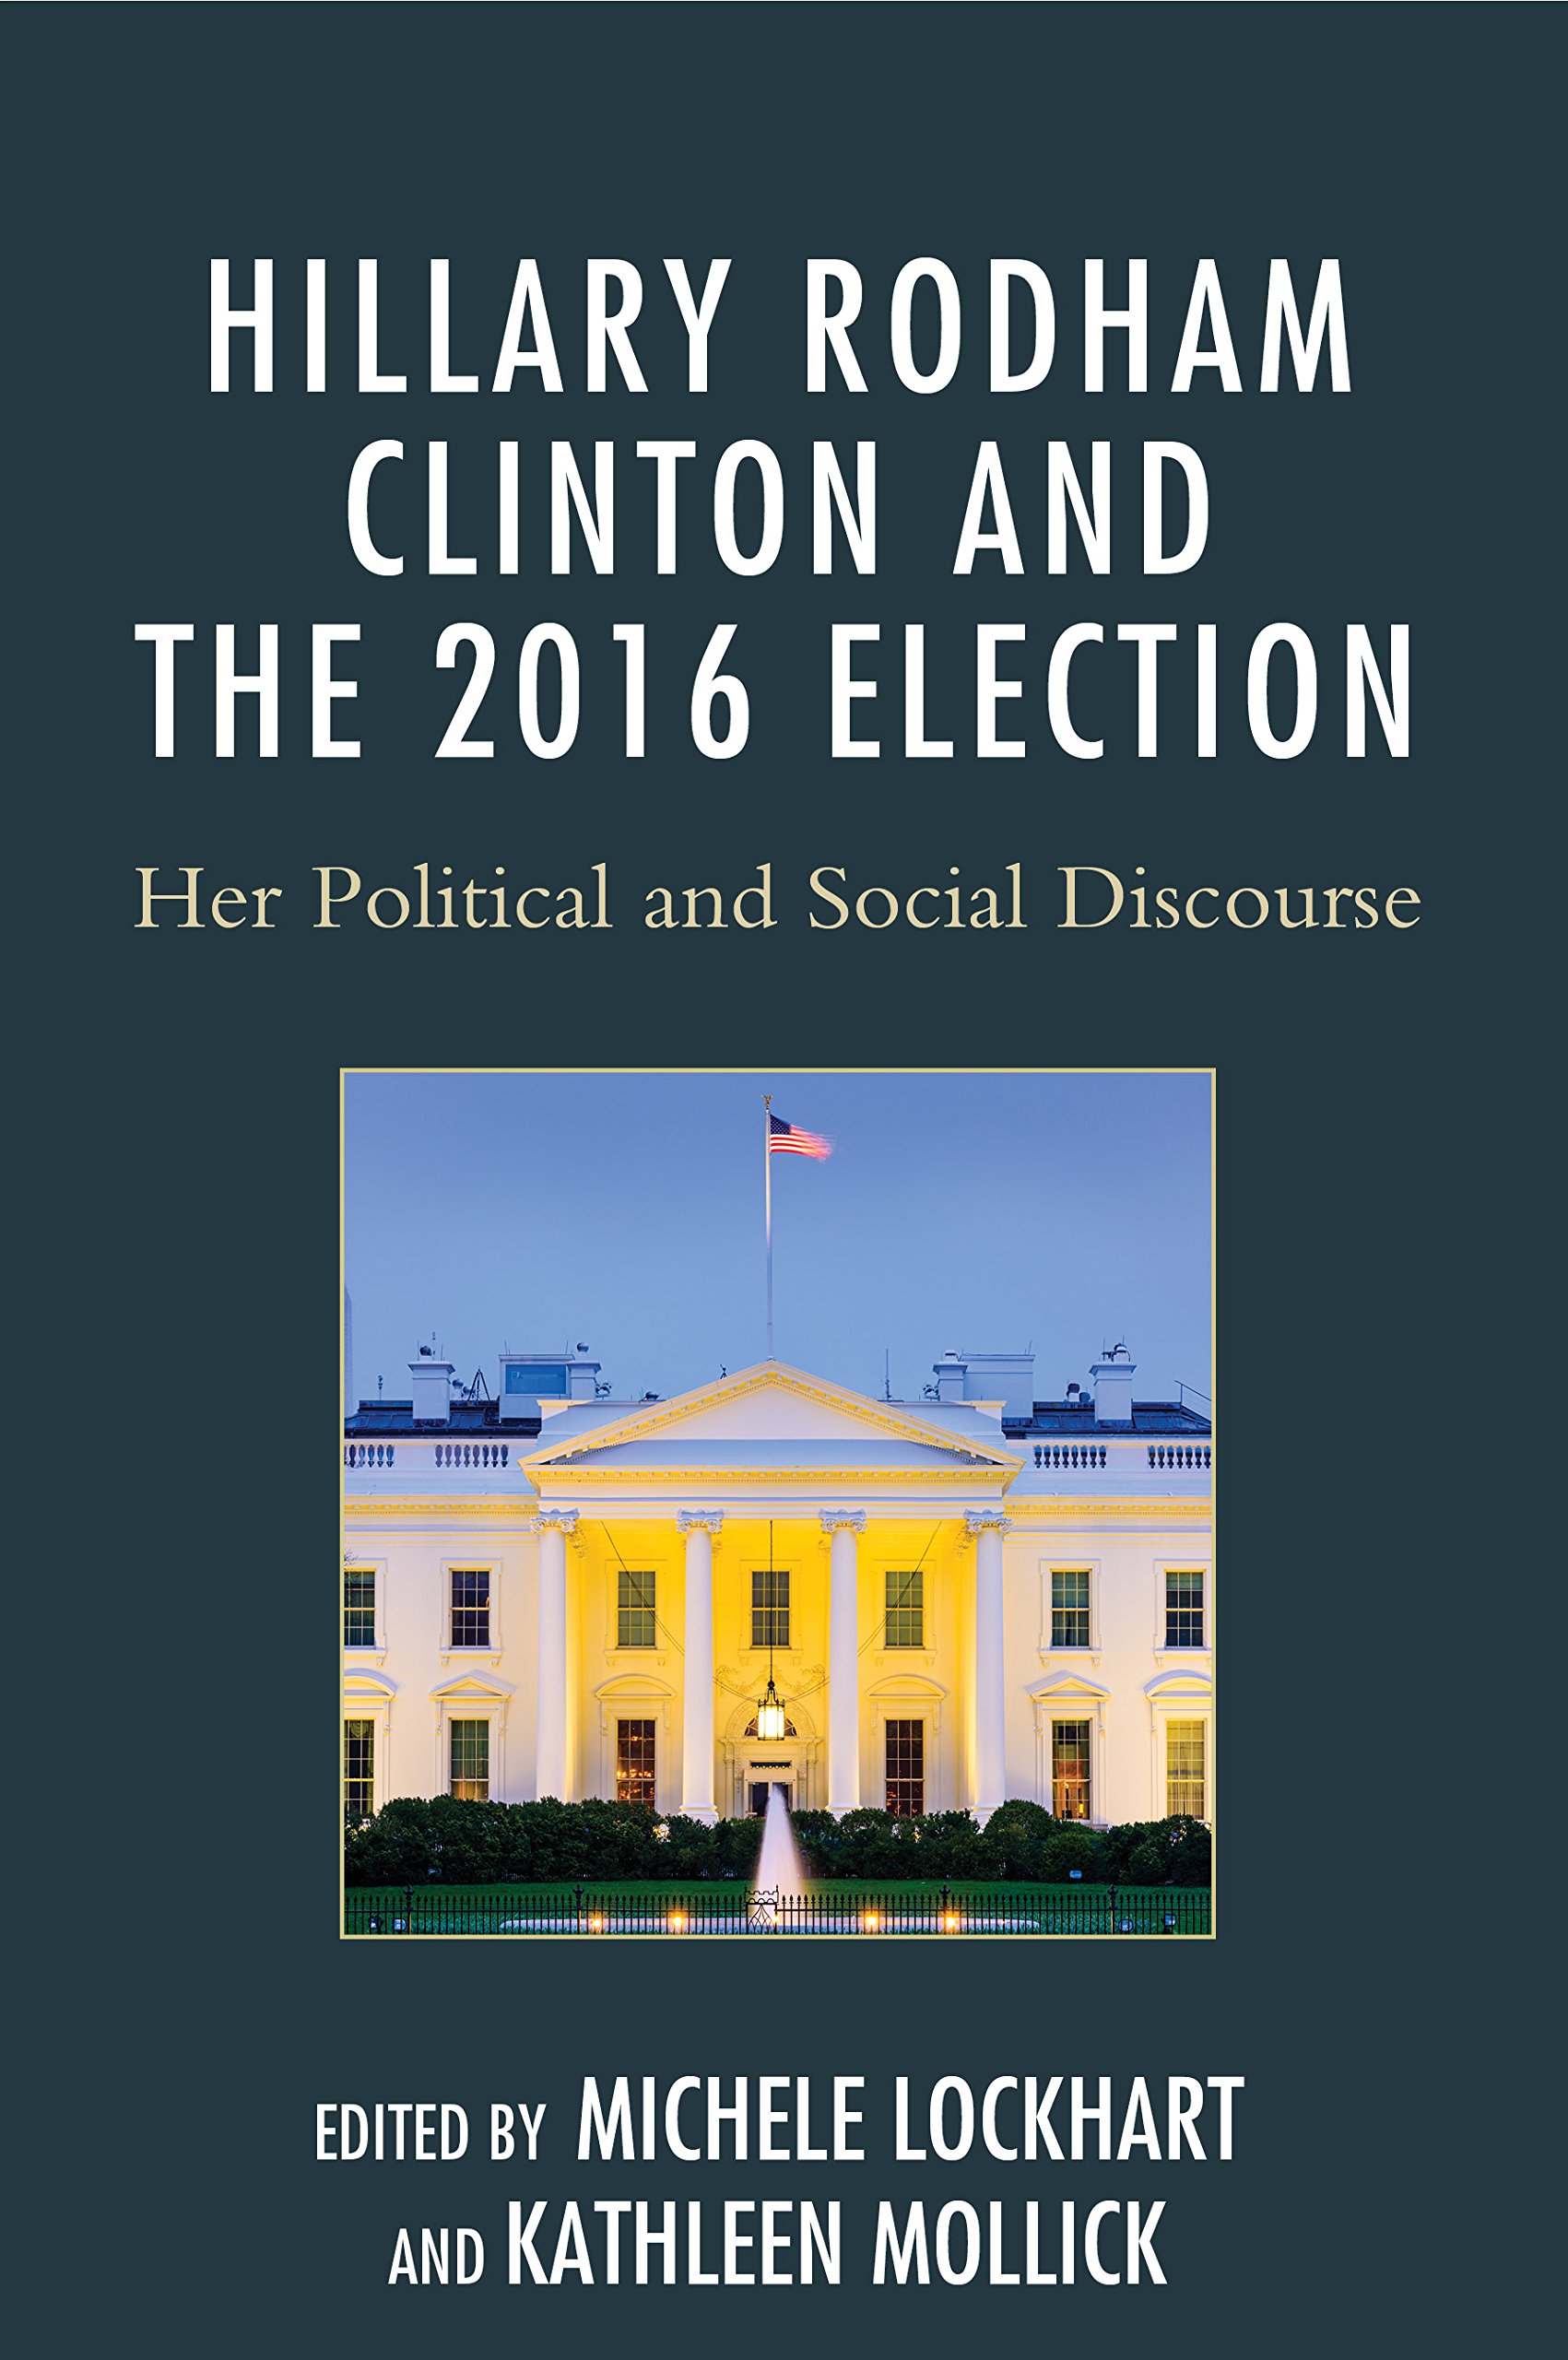 Hillary Rodham Clinton and the 2016 Election |